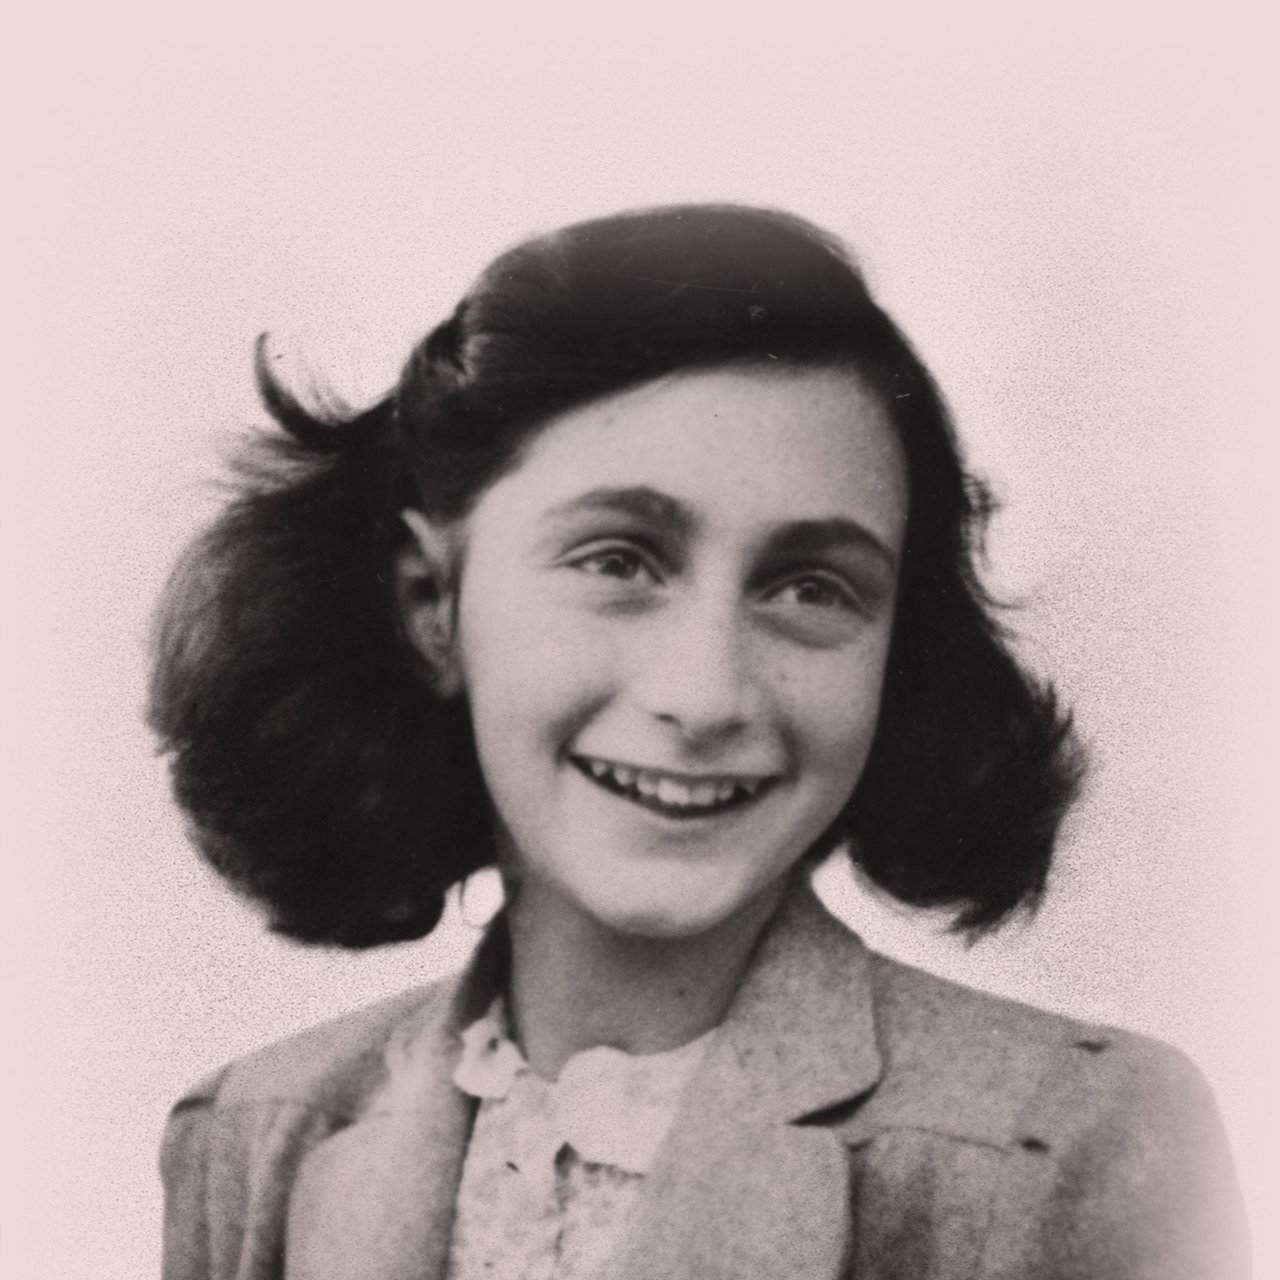 Anne Frank alive and kicking